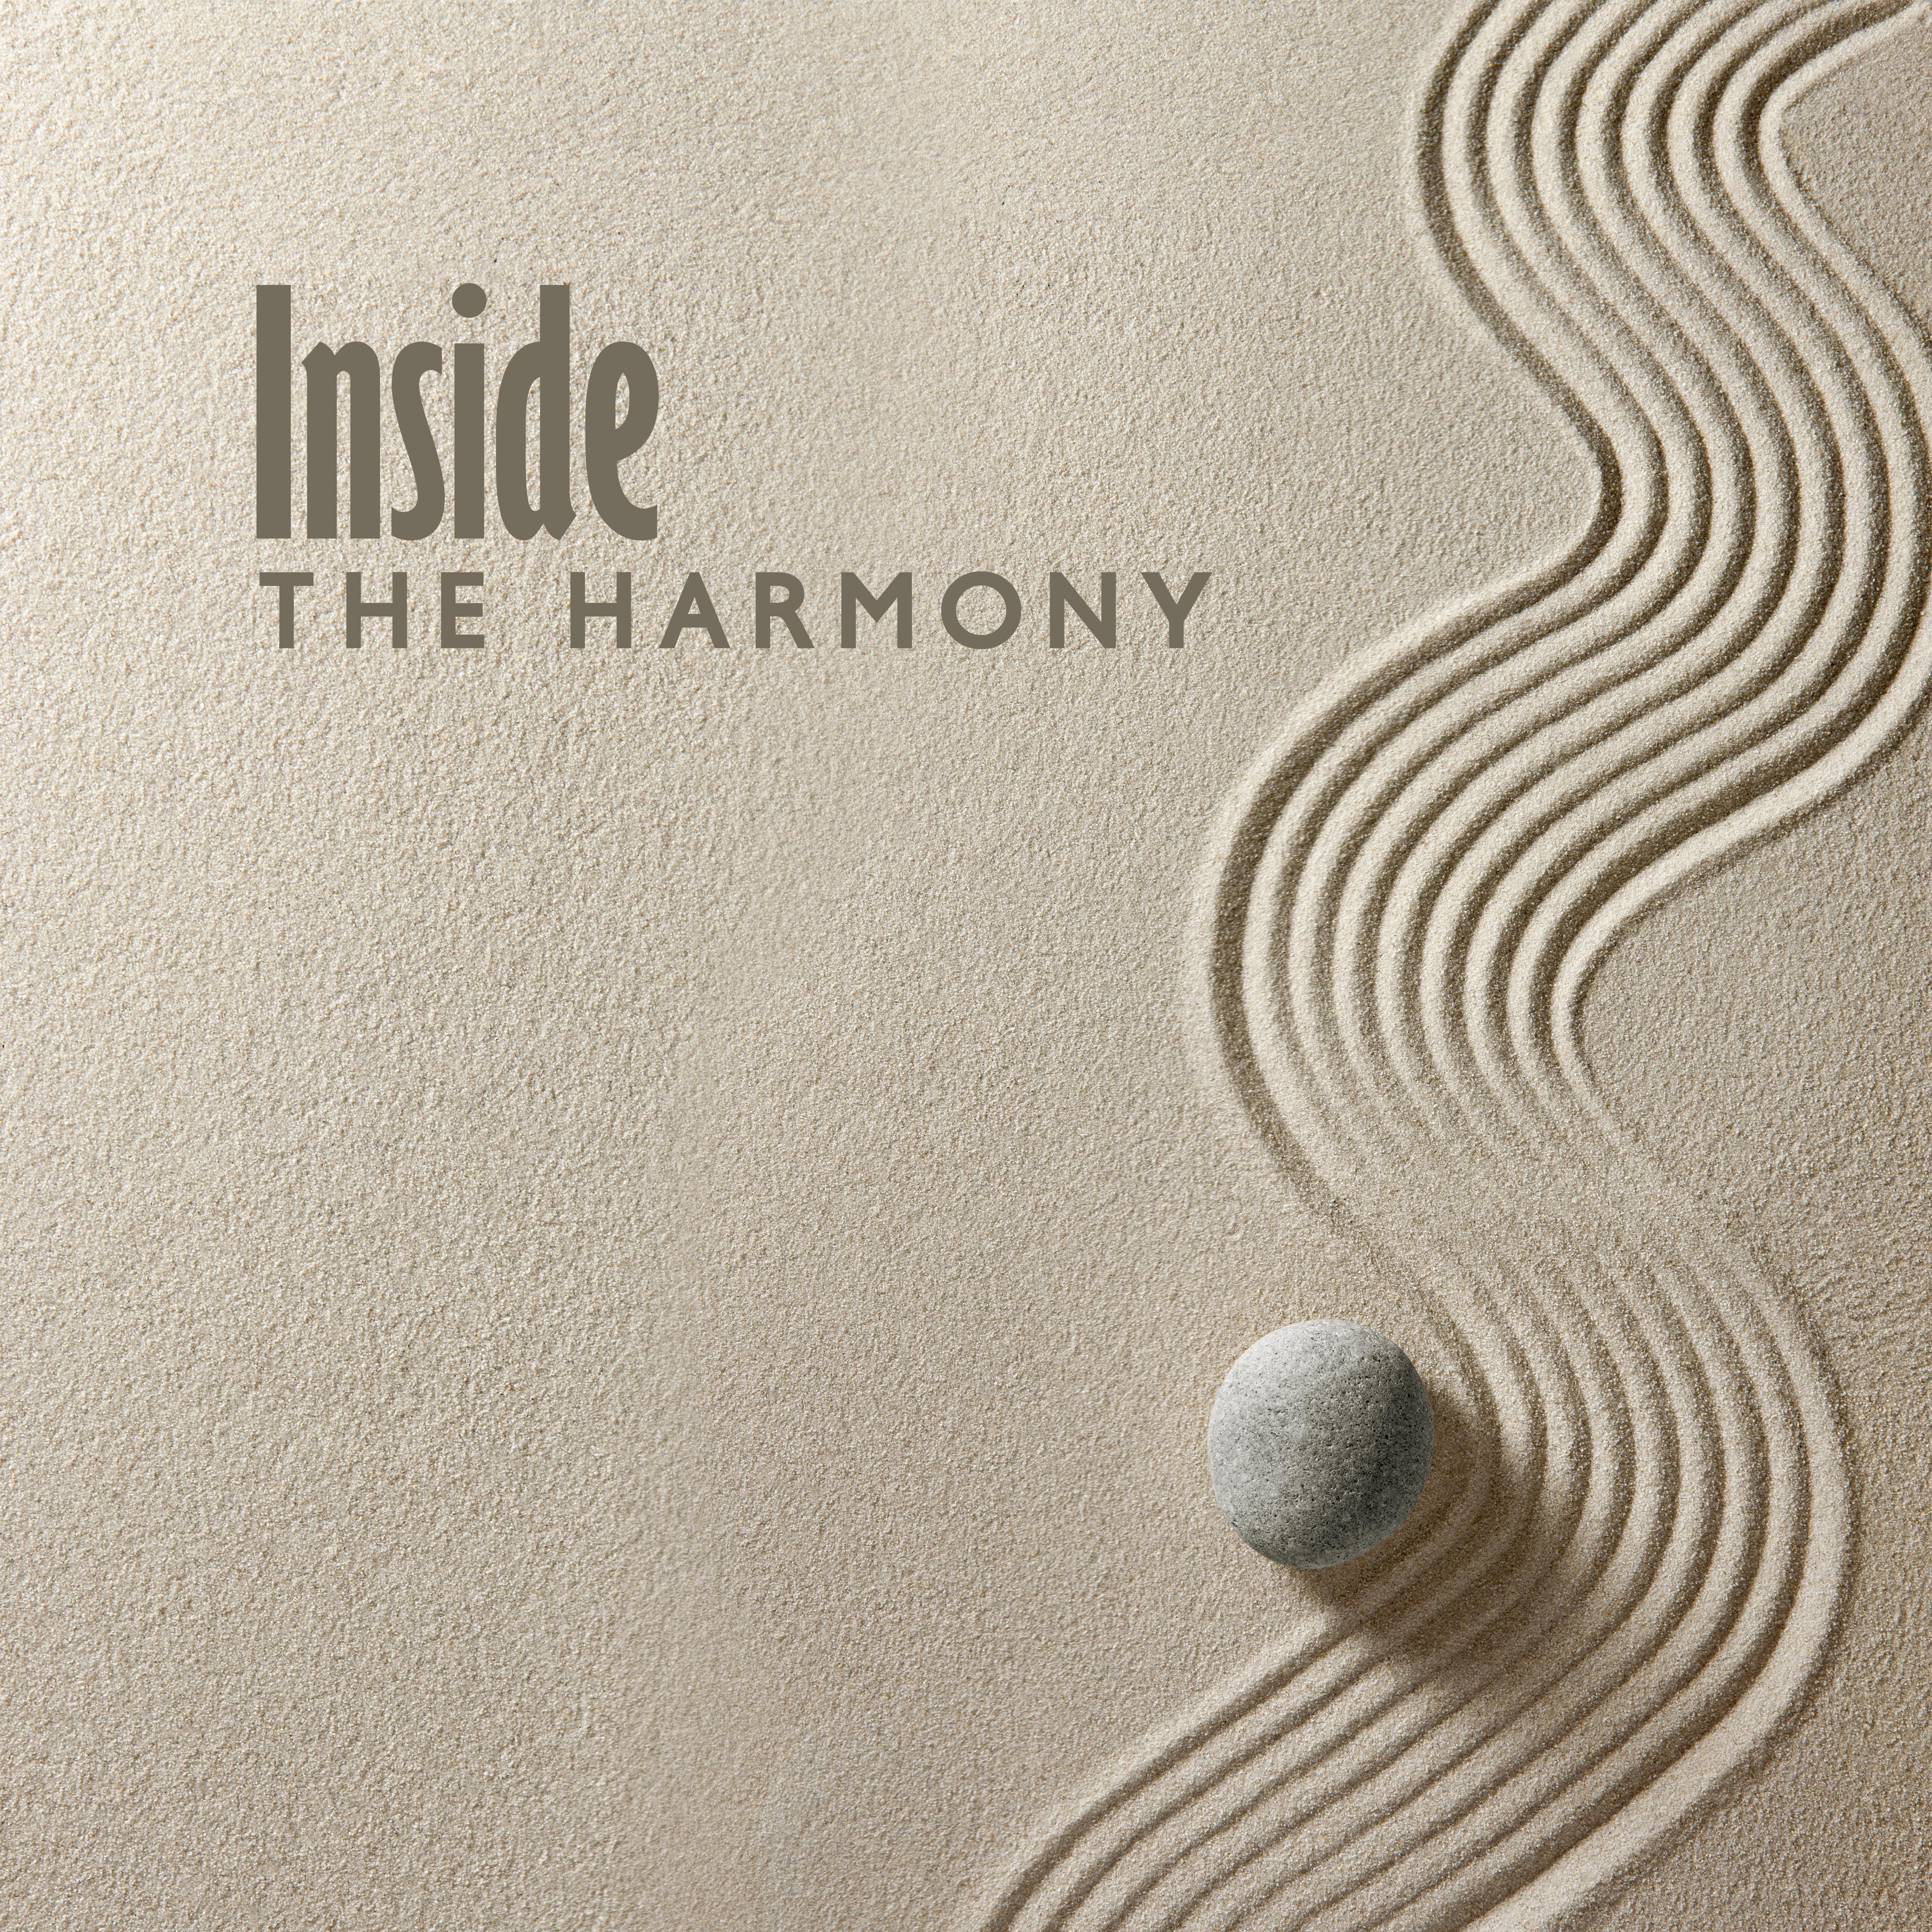 Inside The Harmony: Internal Calm, Peace and Rest